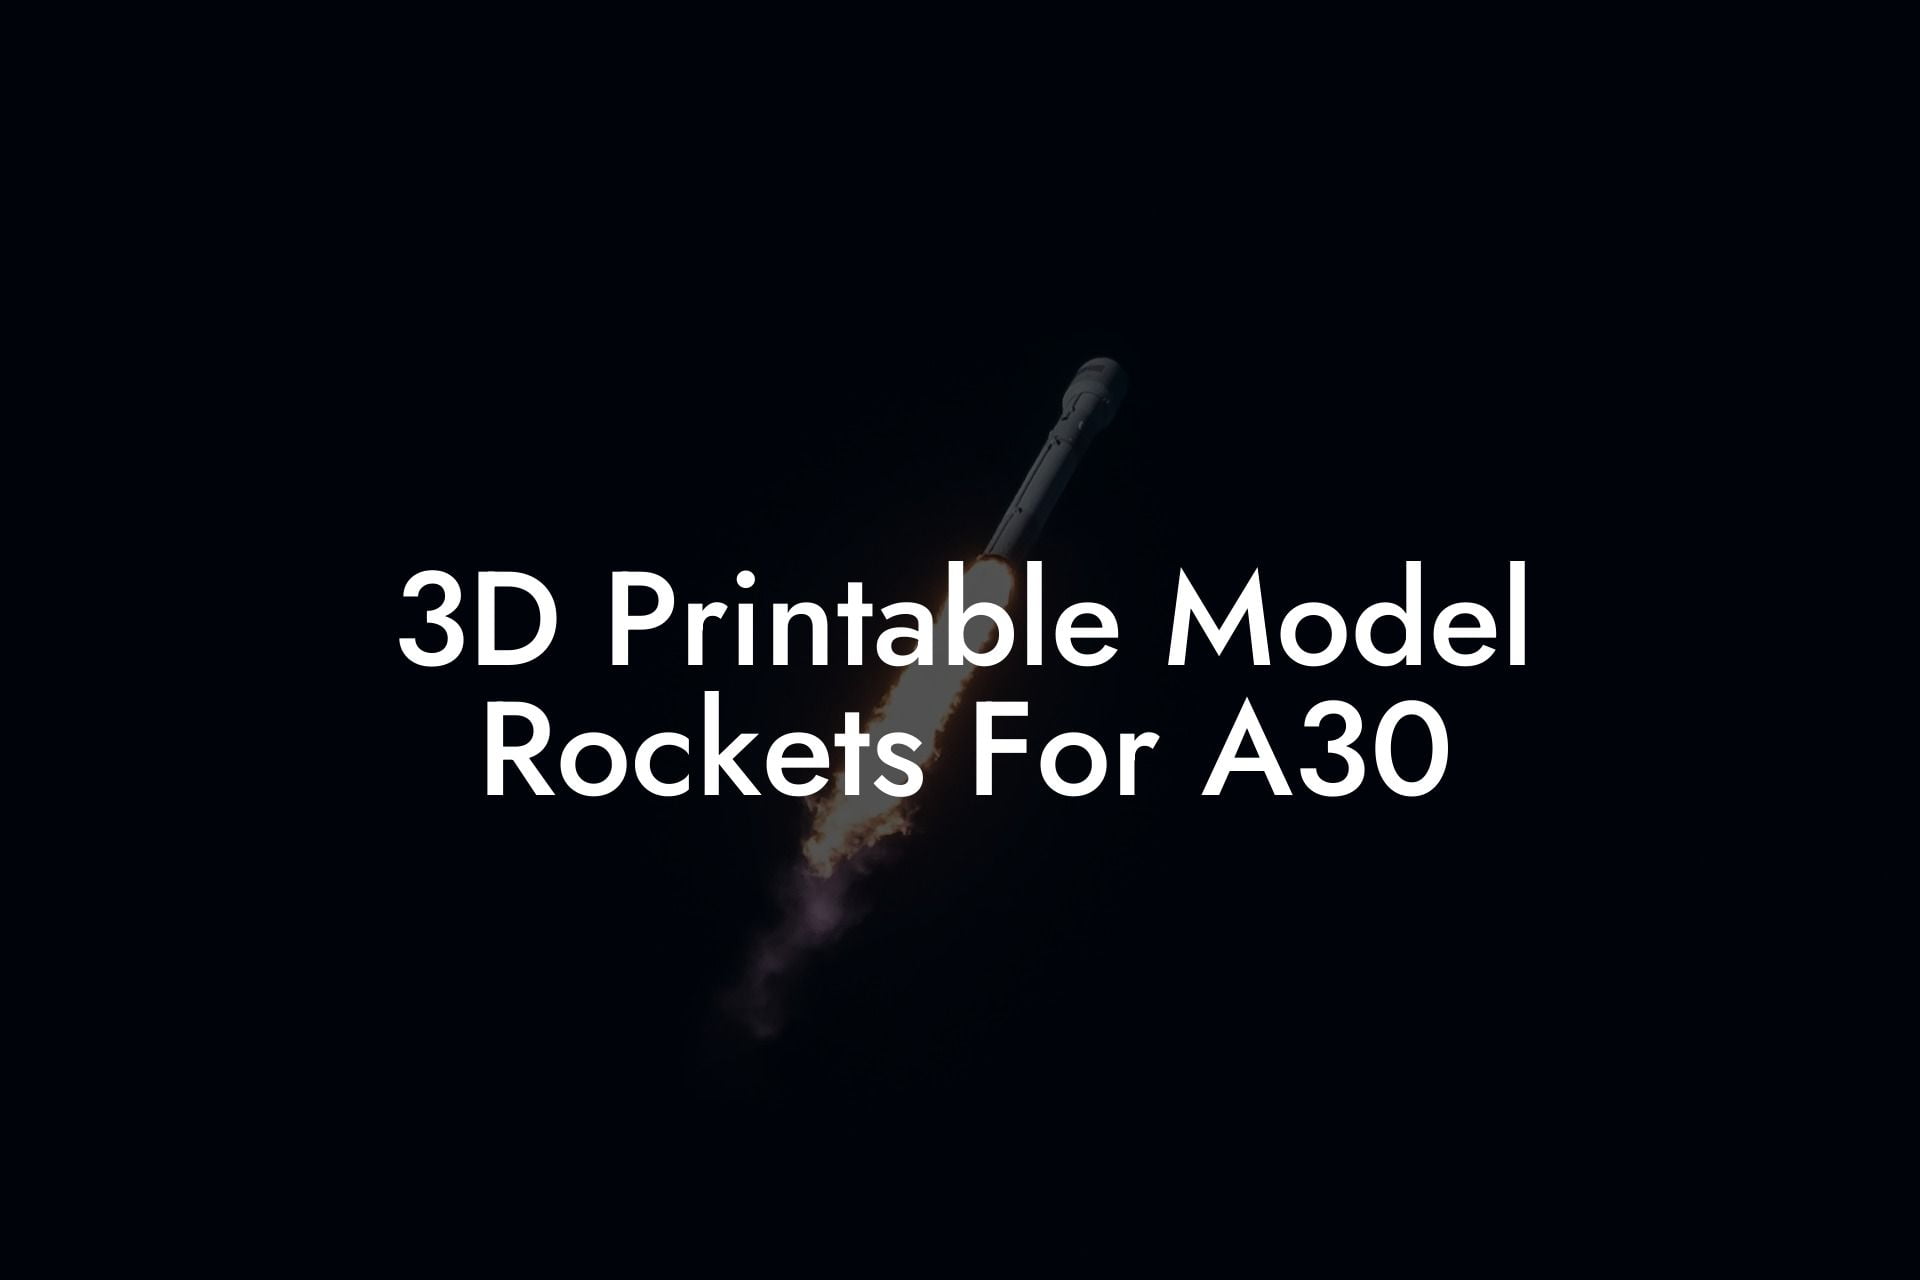 3D Printable Model Rockets For A30